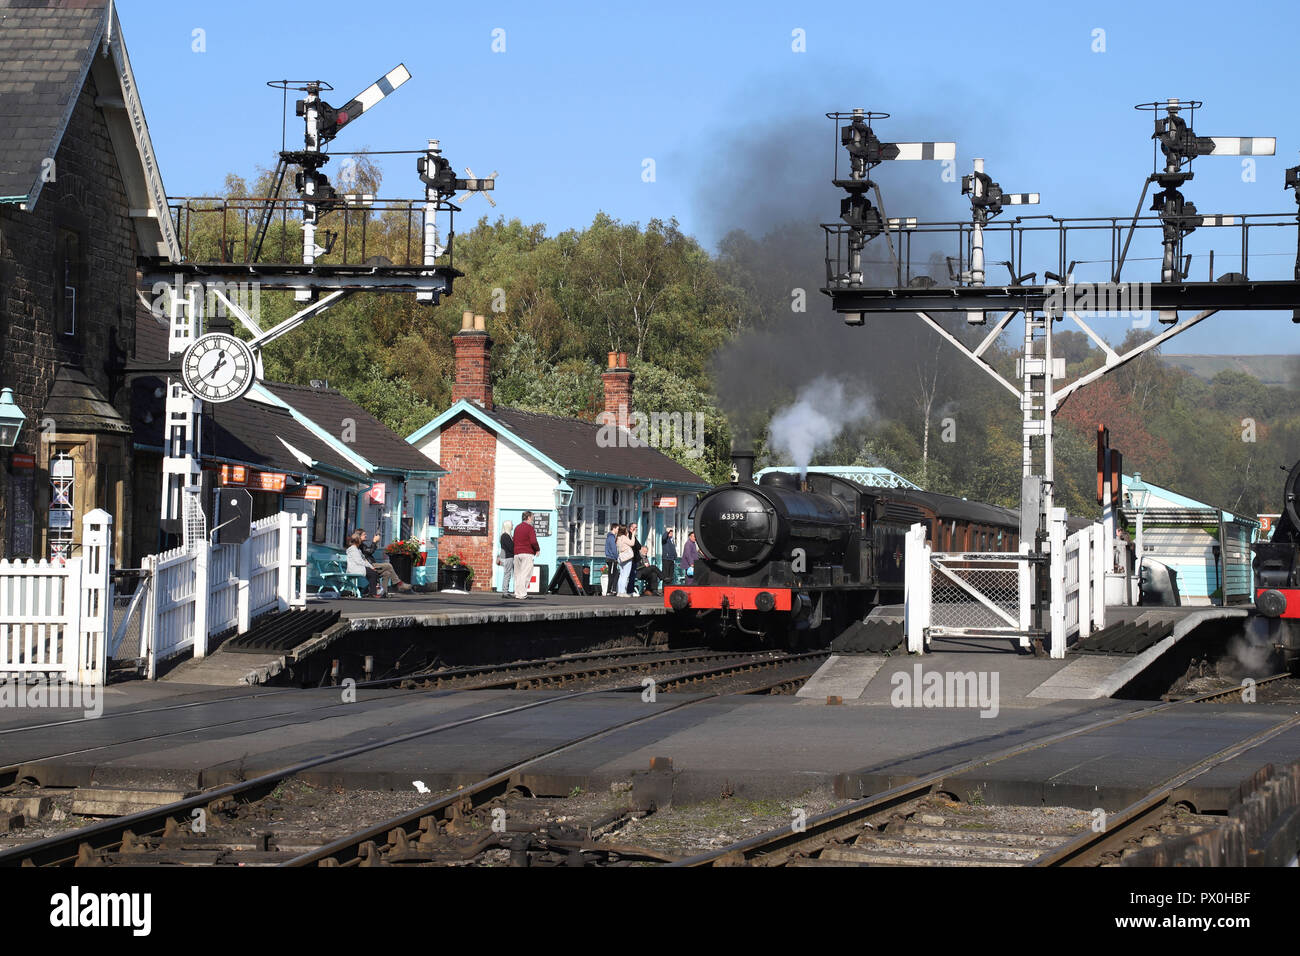 Steam train with carriages about to depart from Grosmont Station on the NYMR heritage railway line between Whitby and Pickering, North Yorkshire. Stock Photo